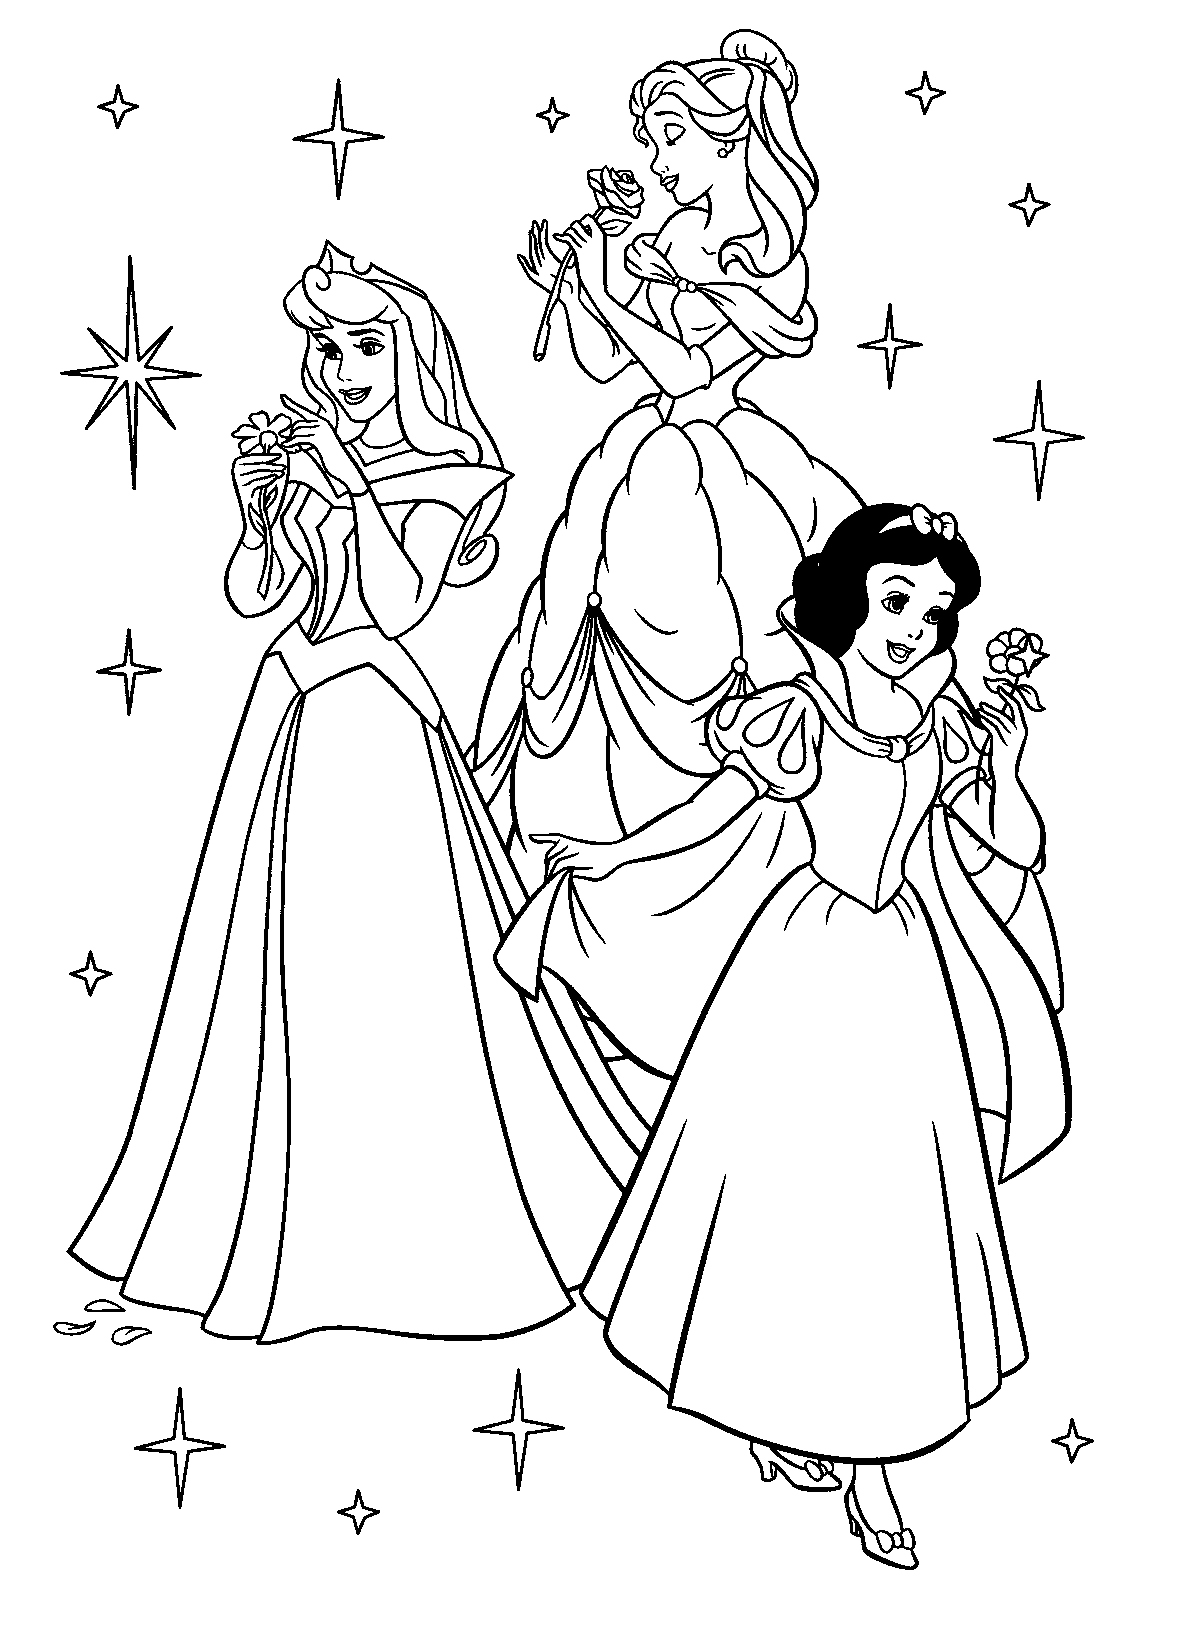 coloring-pages-adults-disney-coloring-disney-adults-aladdin-horacio-elliff